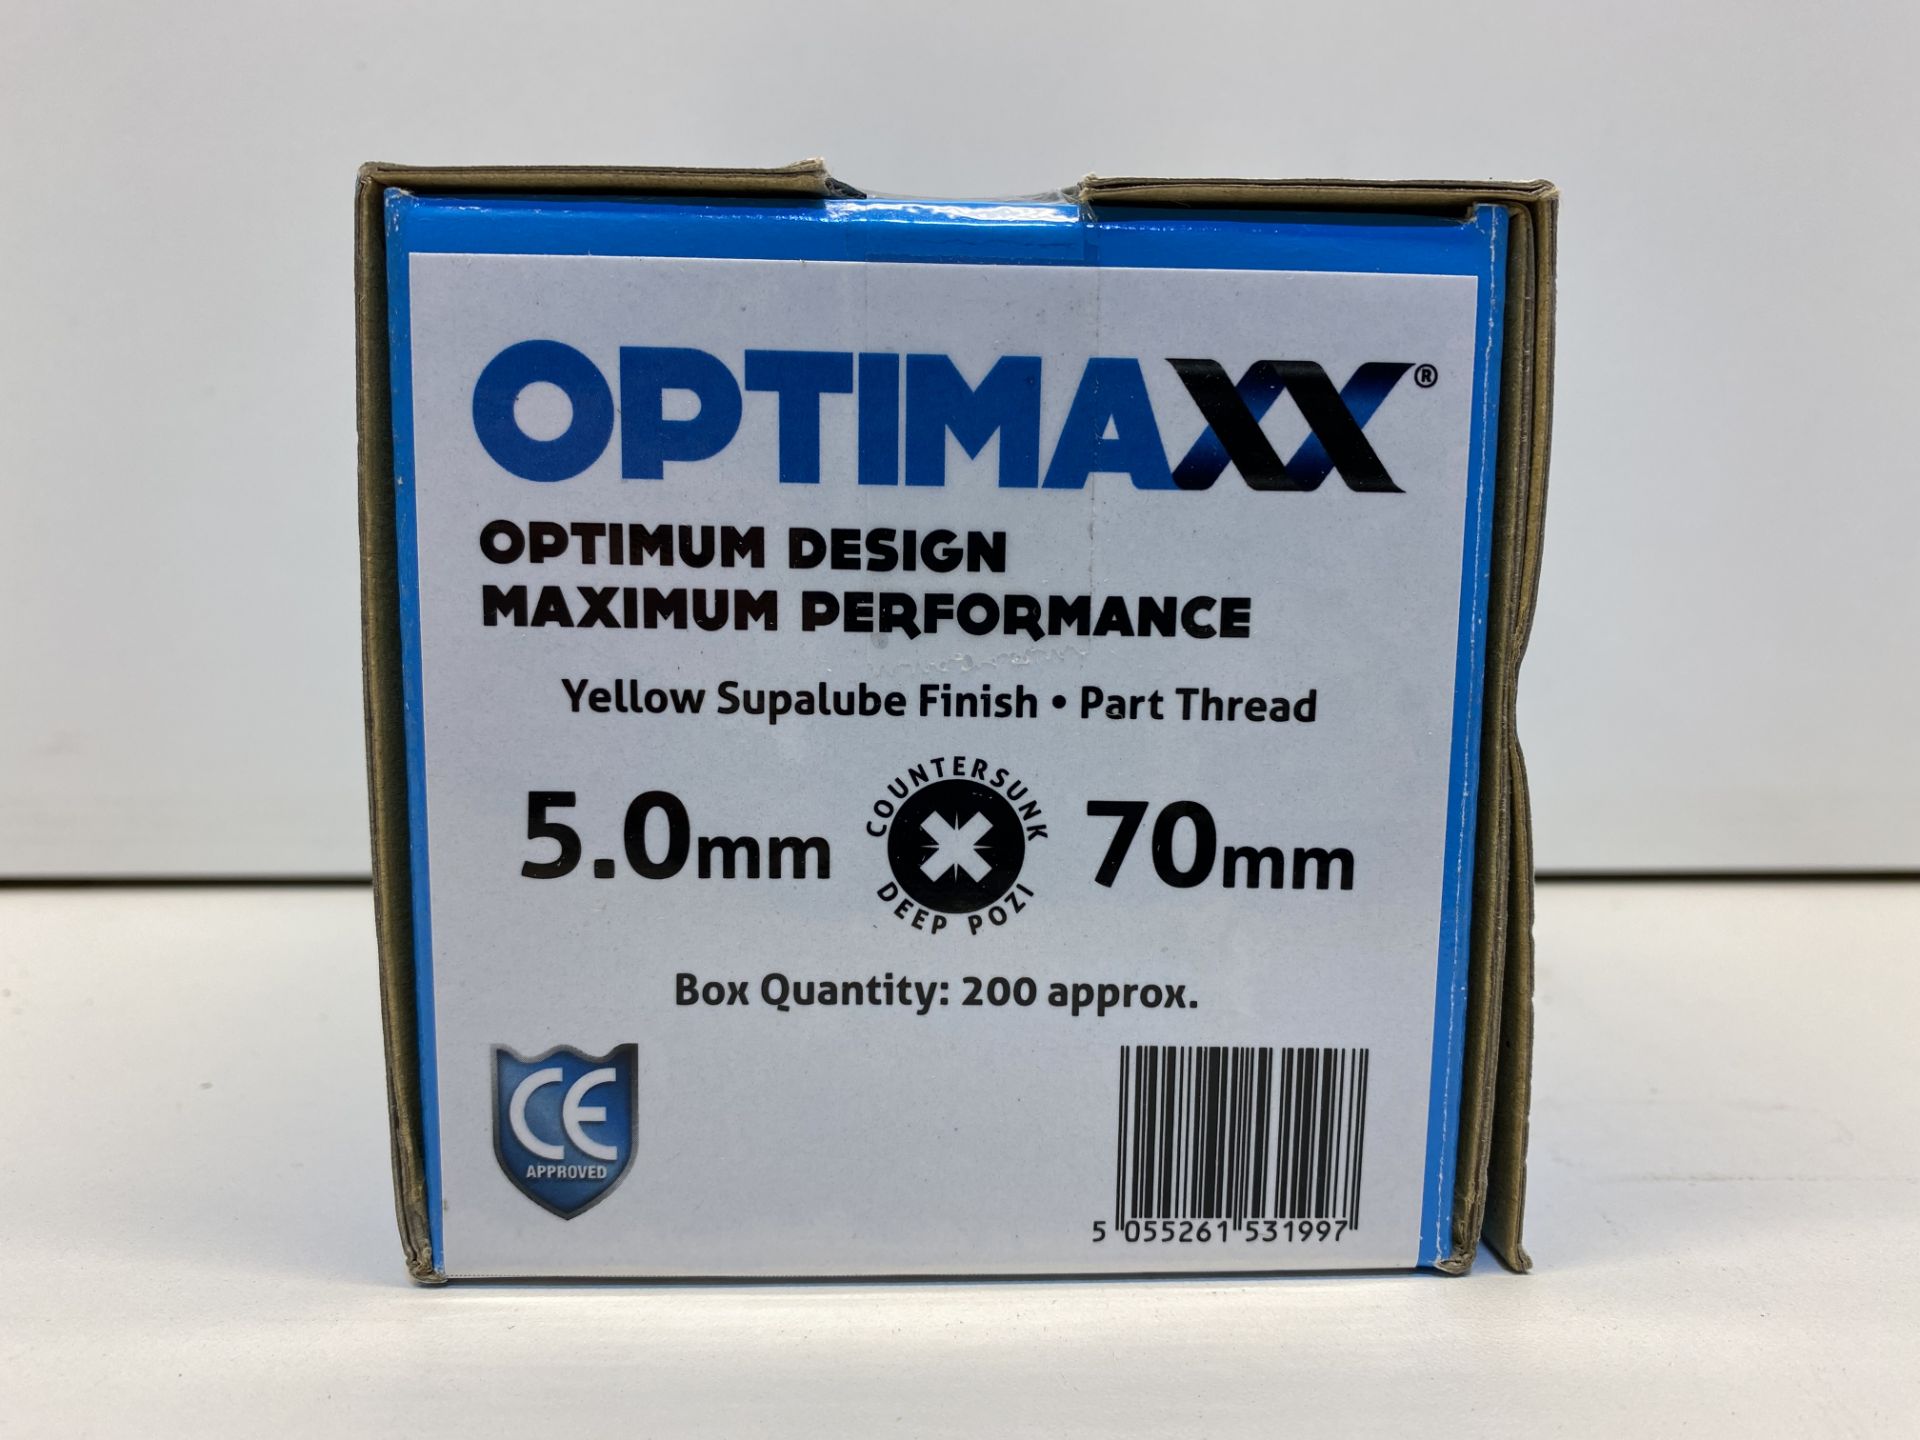 Optimaxx Wood Screw Selection in Case + Tape Measure - Image 4 of 12